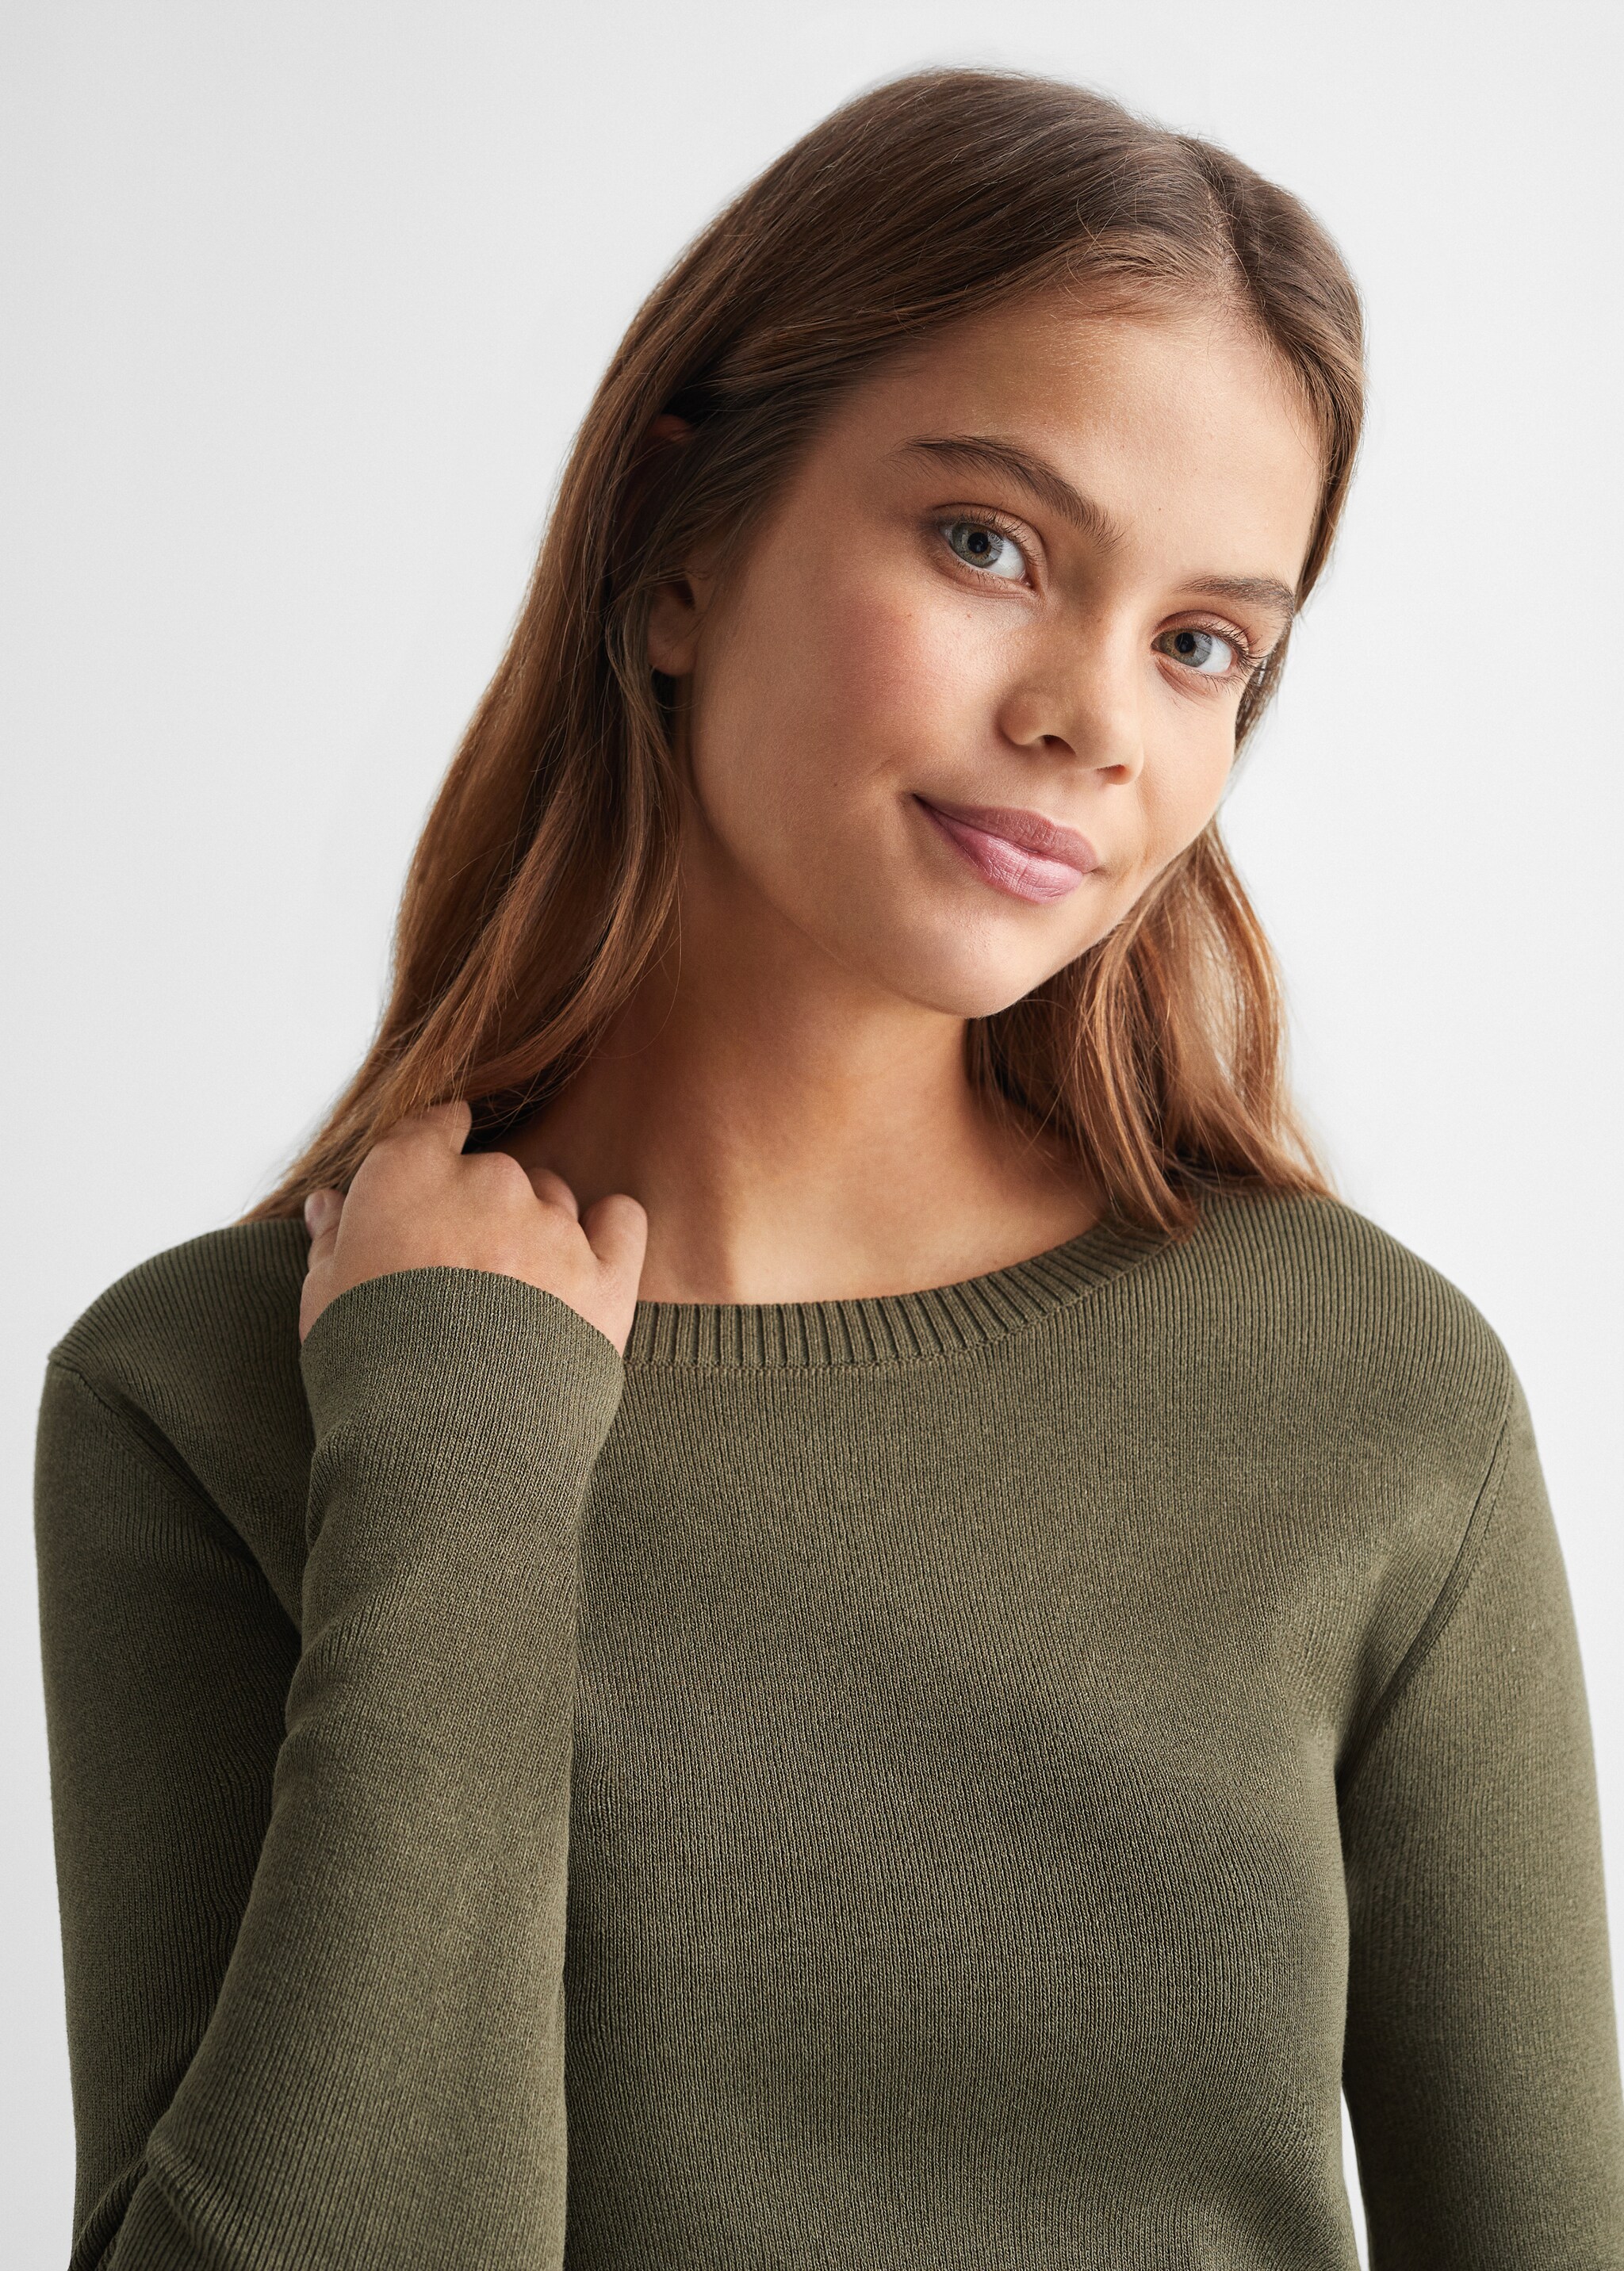 Fine-knit sweater - Details of the article 1